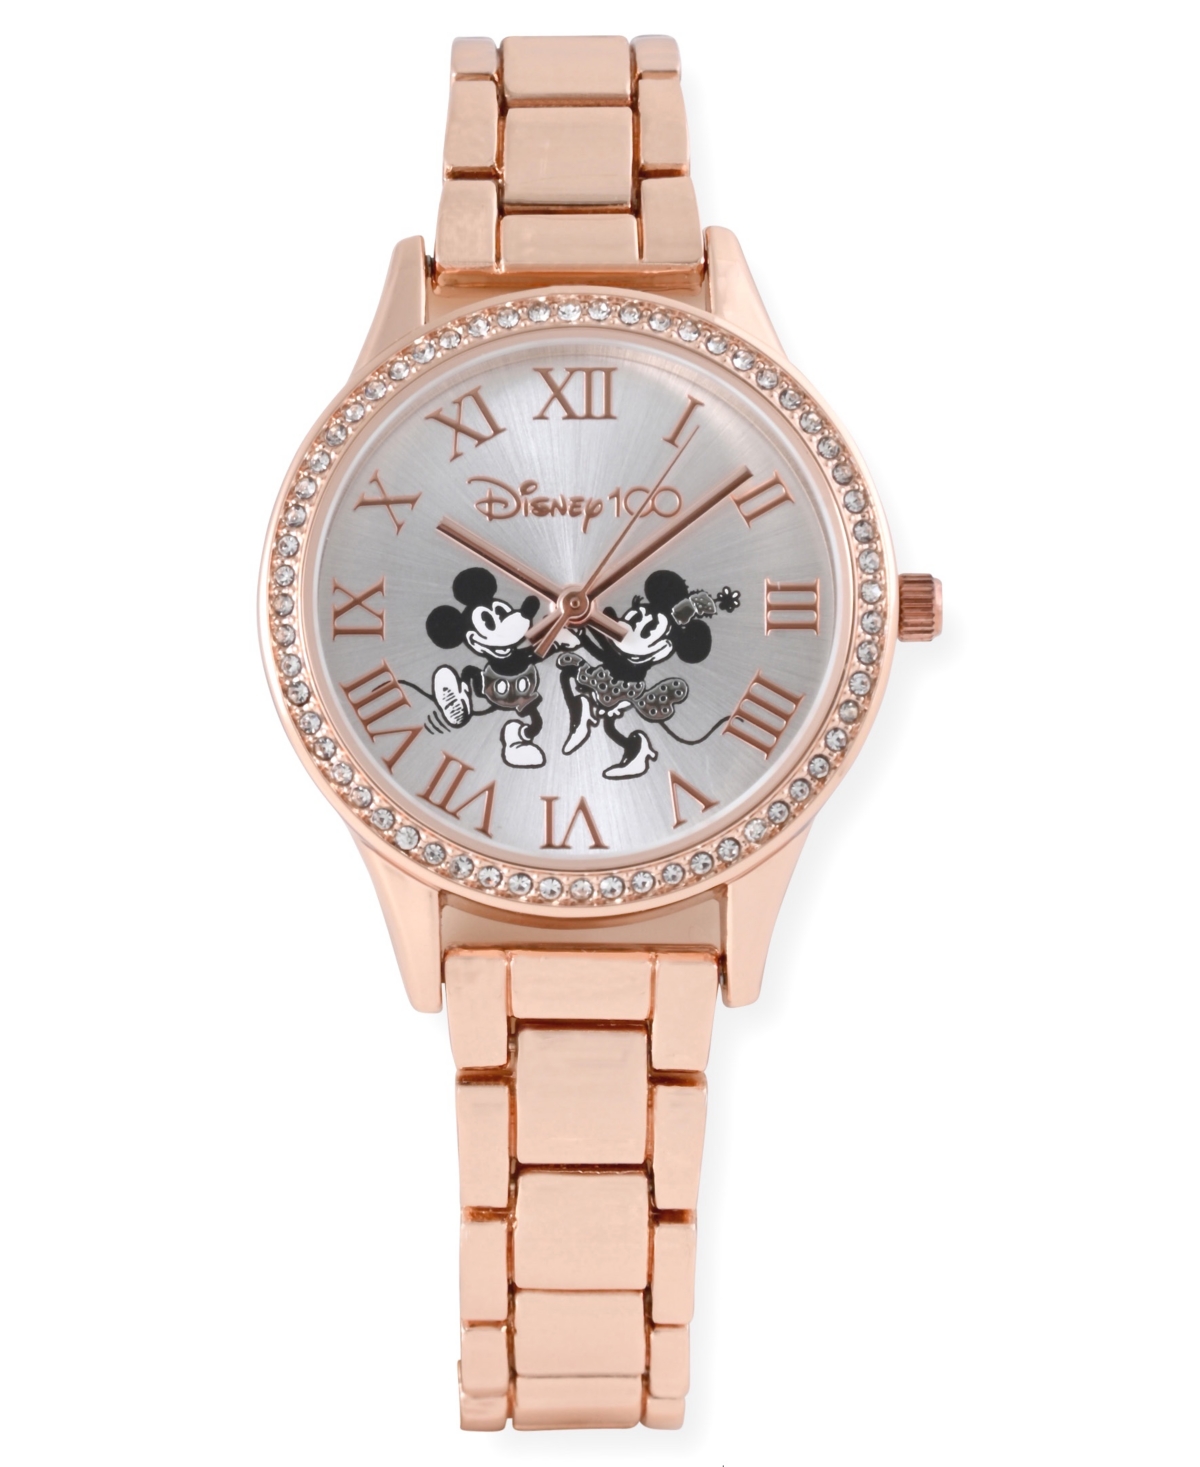 Accutime Unisex Disney 100th Anniversary Analog Rose Gold-tone Alloy Watch 26mm